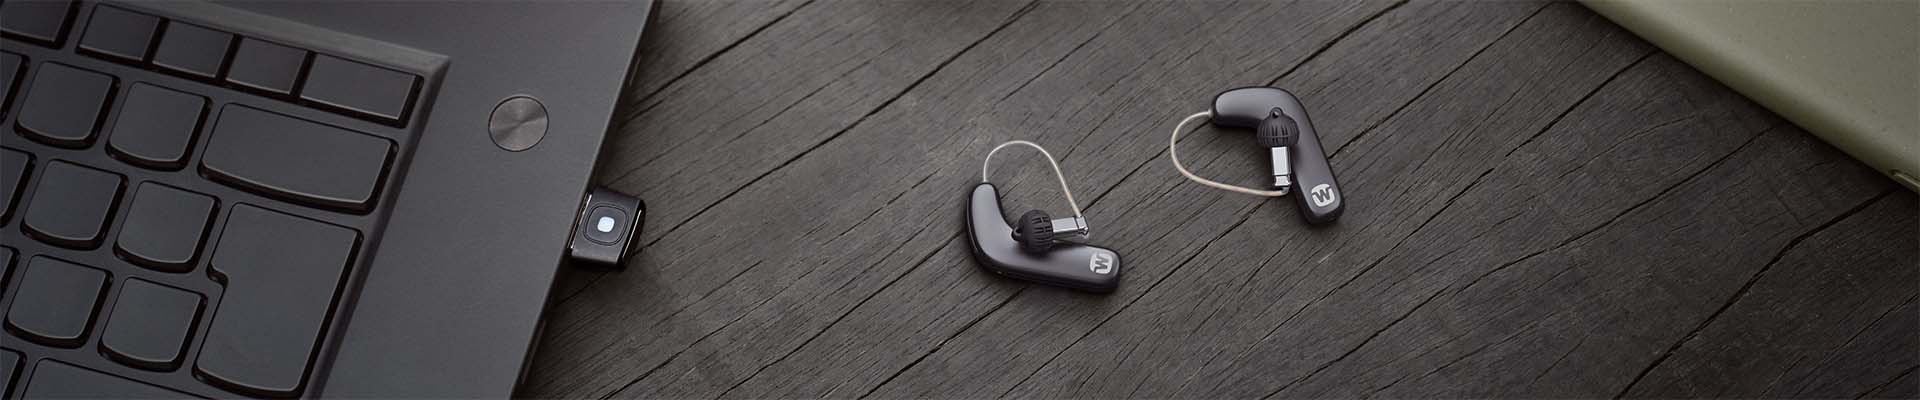 Widex SmartRIC hearing aids with SoundConnect